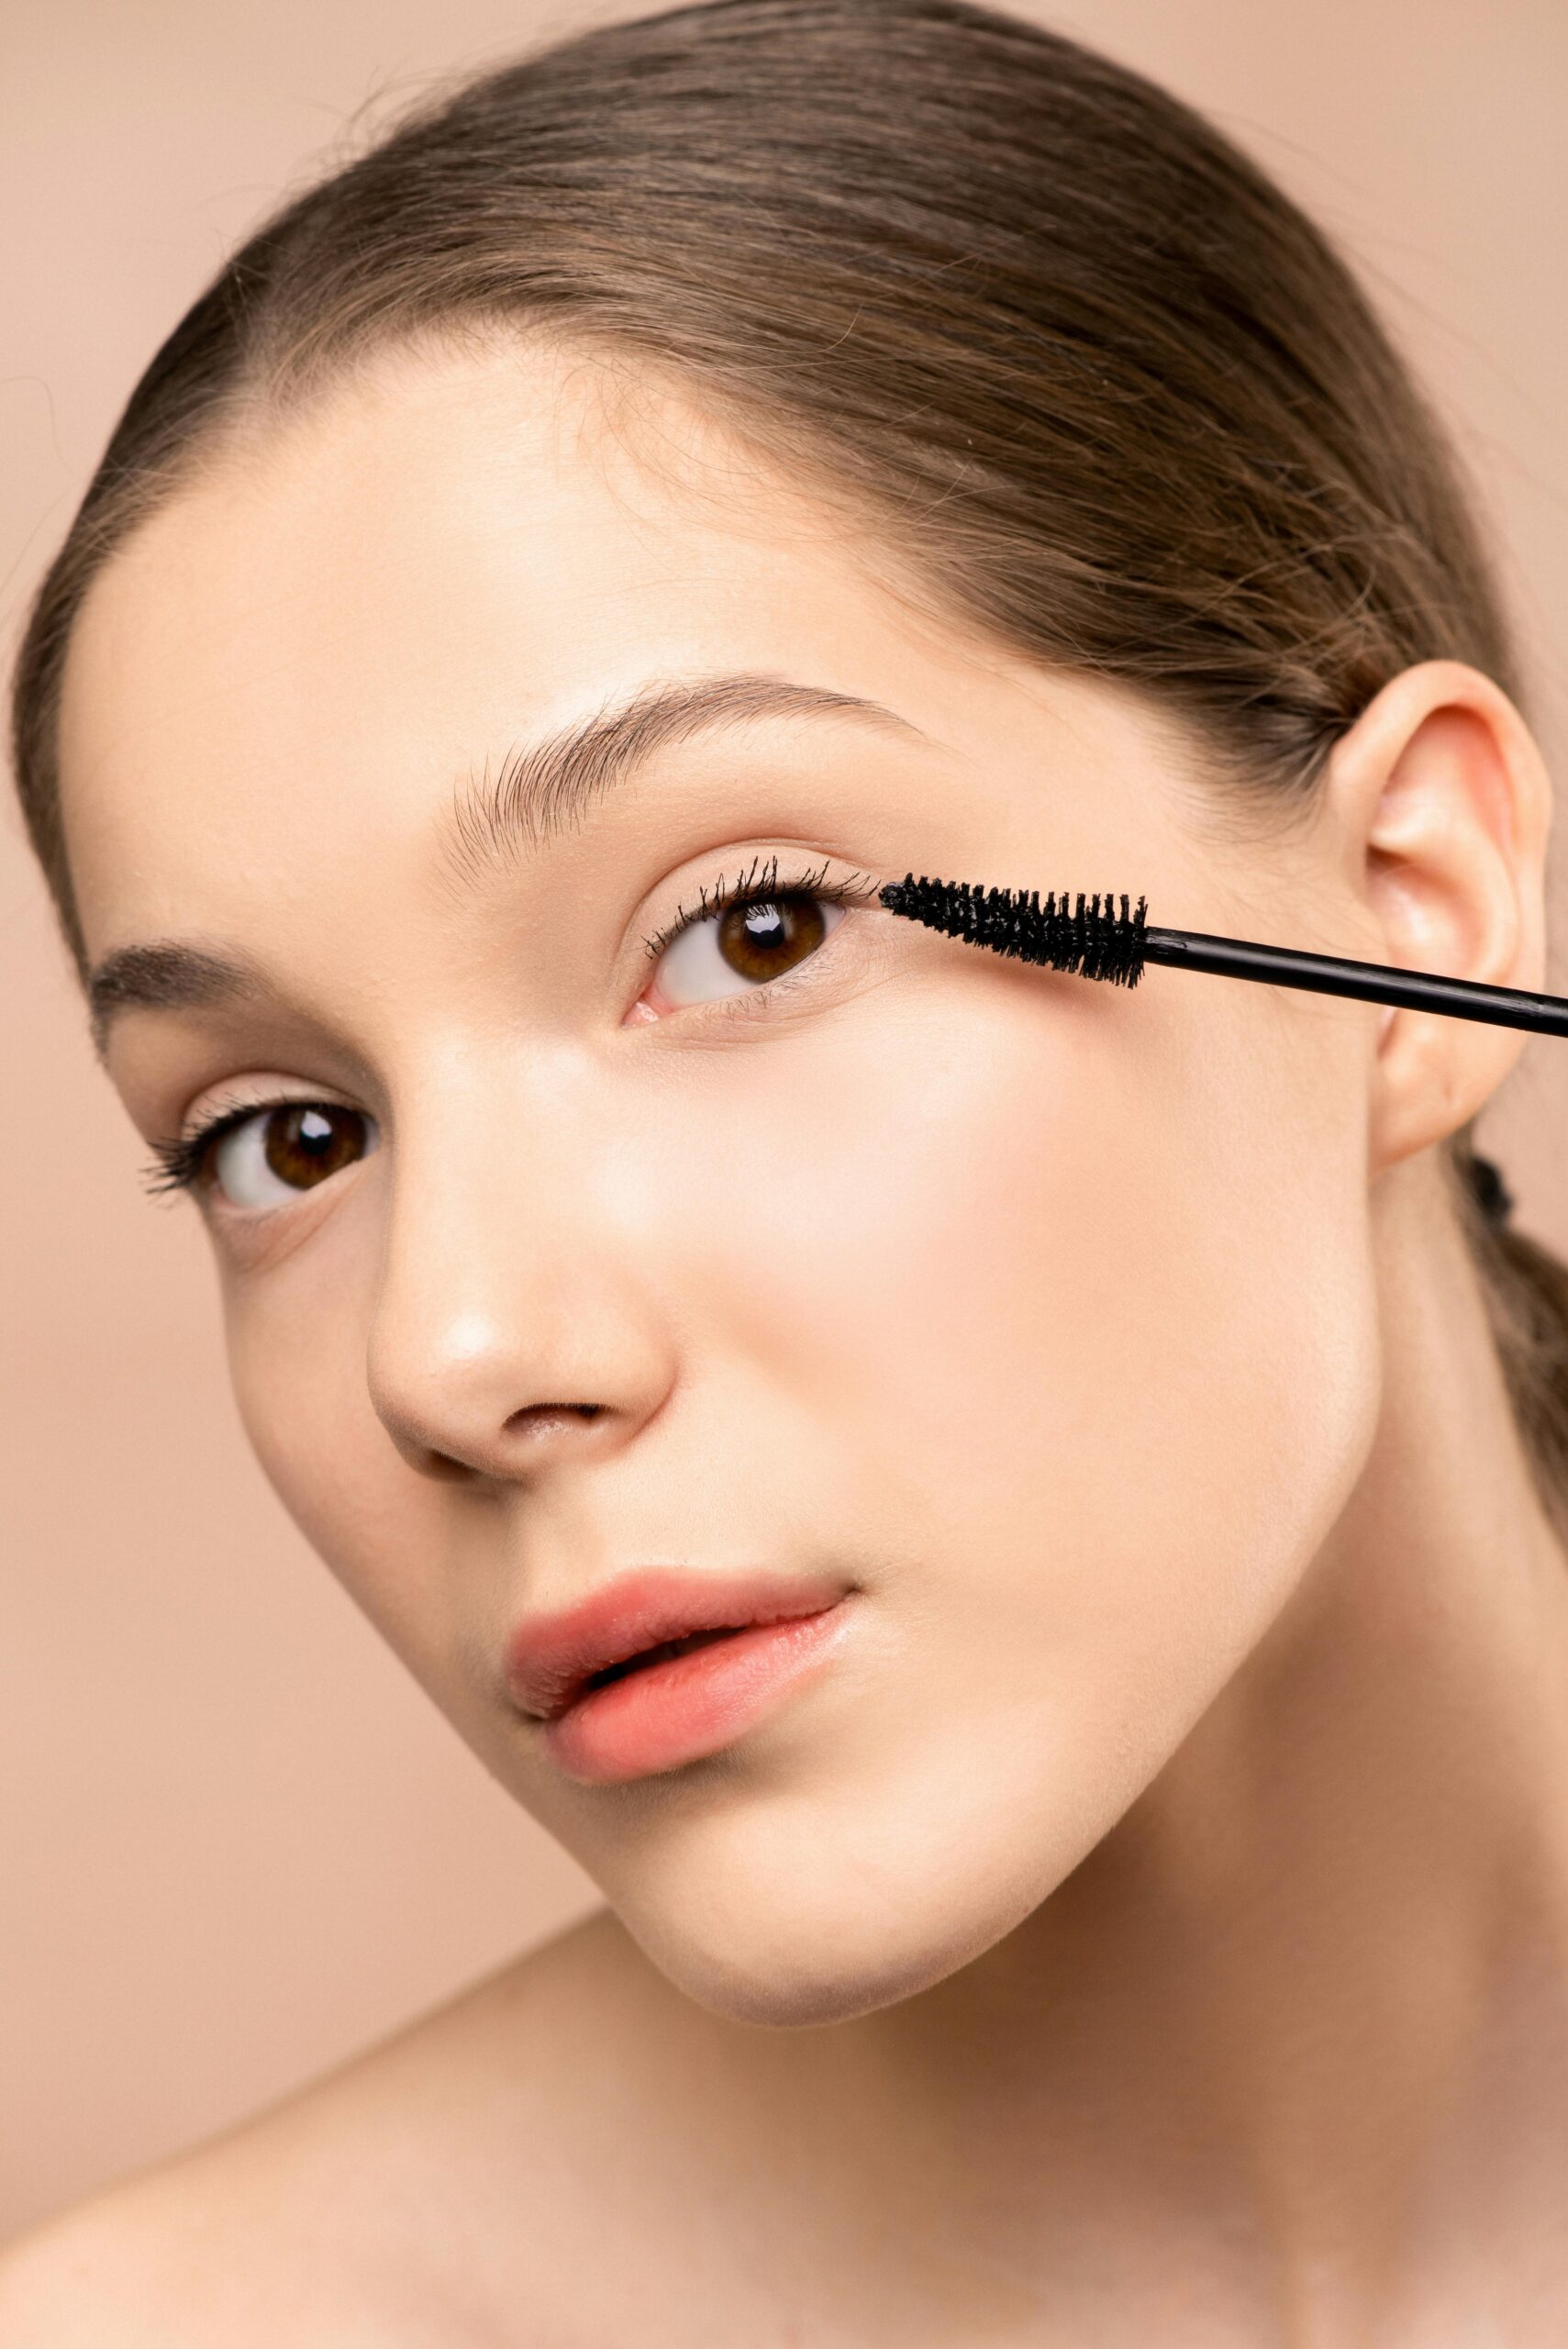 Follow these tips for making the most of your eyelashes.